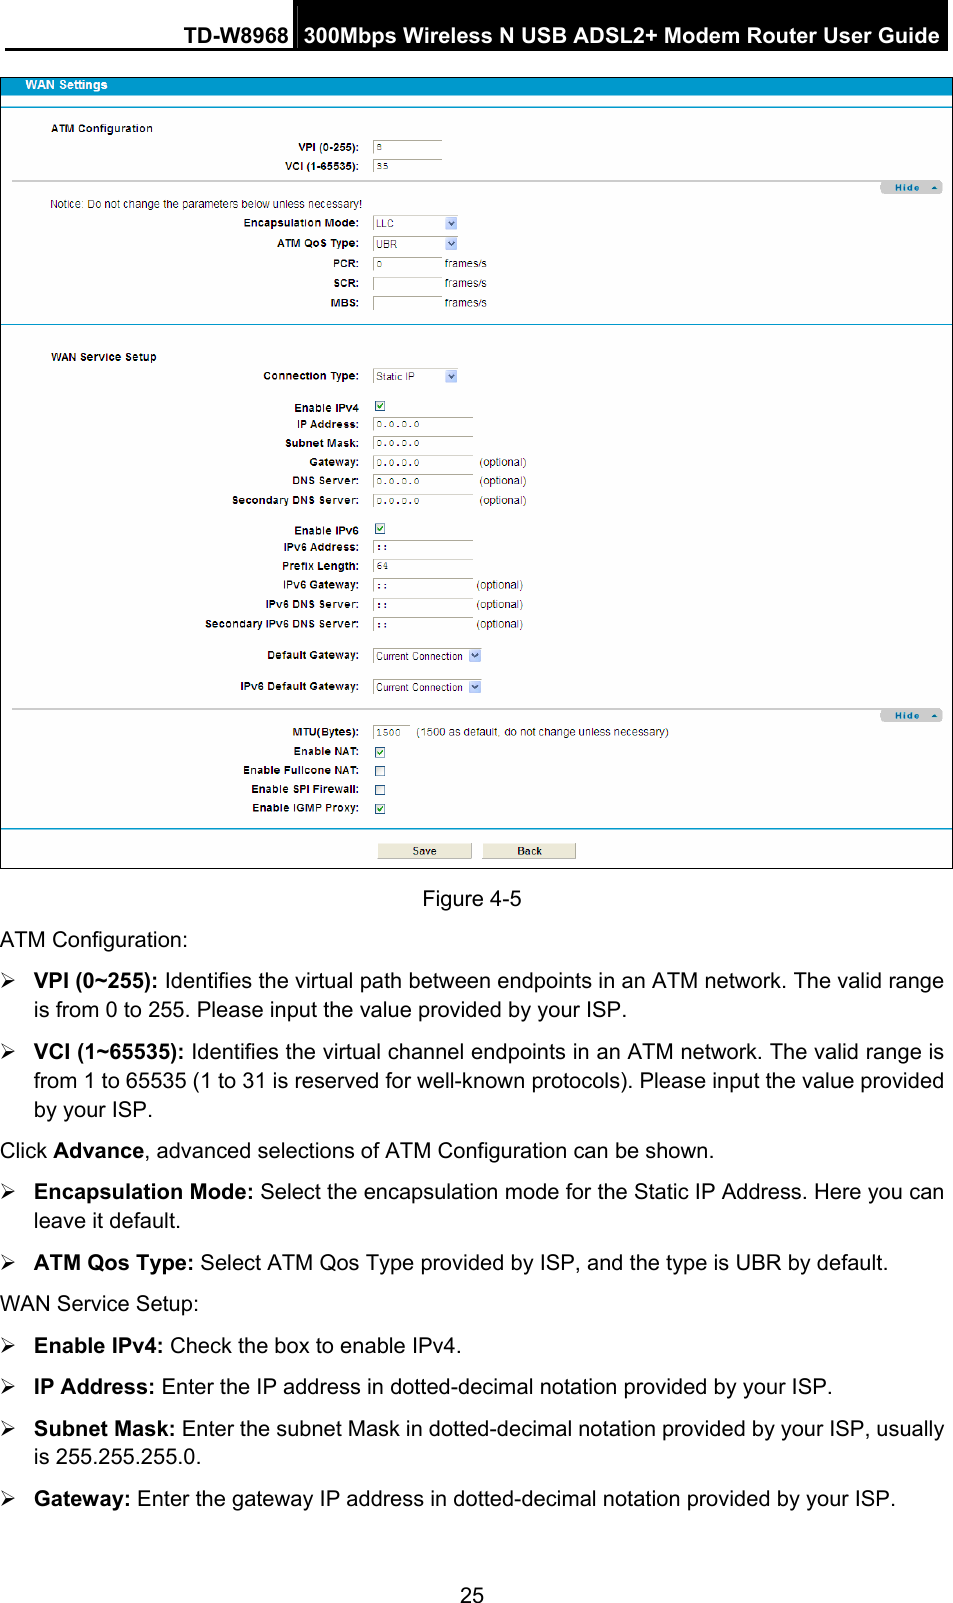 TD-W8968  300Mbps Wireless N USB ADSL2+ Modem Router User Guide 25  Figure 4-5 ATM Configuration: ¾ VPI (0~255): Identifies the virtual path between endpoints in an ATM network. The valid range is from 0 to 255. Please input the value provided by your ISP. ¾ VCI (1~65535): Identifies the virtual channel endpoints in an ATM network. The valid range is from 1 to 65535 (1 to 31 is reserved for well-known protocols). Please input the value provided by your ISP. Click Advance, advanced selections of ATM Configuration can be shown. ¾ Encapsulation Mode: Select the encapsulation mode for the Static IP Address. Here you can leave it default. ¾ ATM Qos Type: Select ATM Qos Type provided by ISP, and the type is UBR by default. WAN Service Setup: ¾ Enable IPv4: Check the box to enable IPv4. ¾ IP Address: Enter the IP address in dotted-decimal notation provided by your ISP. ¾ Subnet Mask: Enter the subnet Mask in dotted-decimal notation provided by your ISP, usually is 255.255.255.0. ¾ Gateway: Enter the gateway IP address in dotted-decimal notation provided by your ISP. 